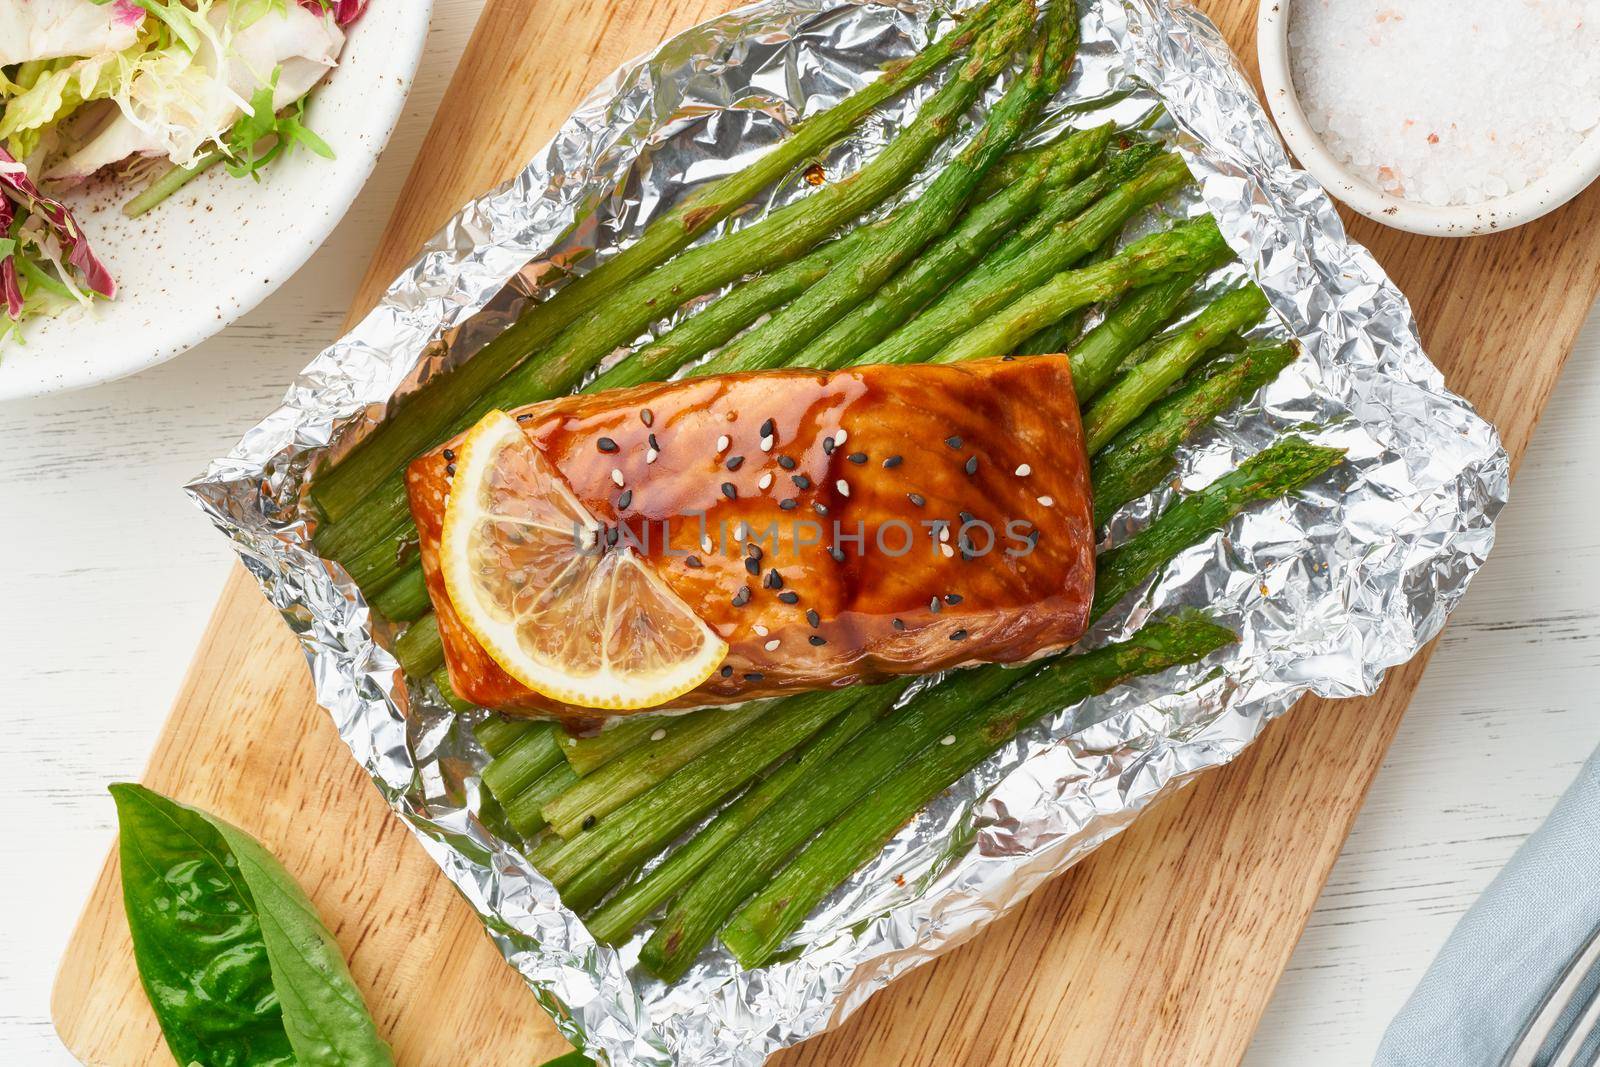 Foil pack dinner with fish. Fillet of salmon with asparagus. Healthy diet food, keto diet, Mediterranean cuisine. Oven-baked hot dinner